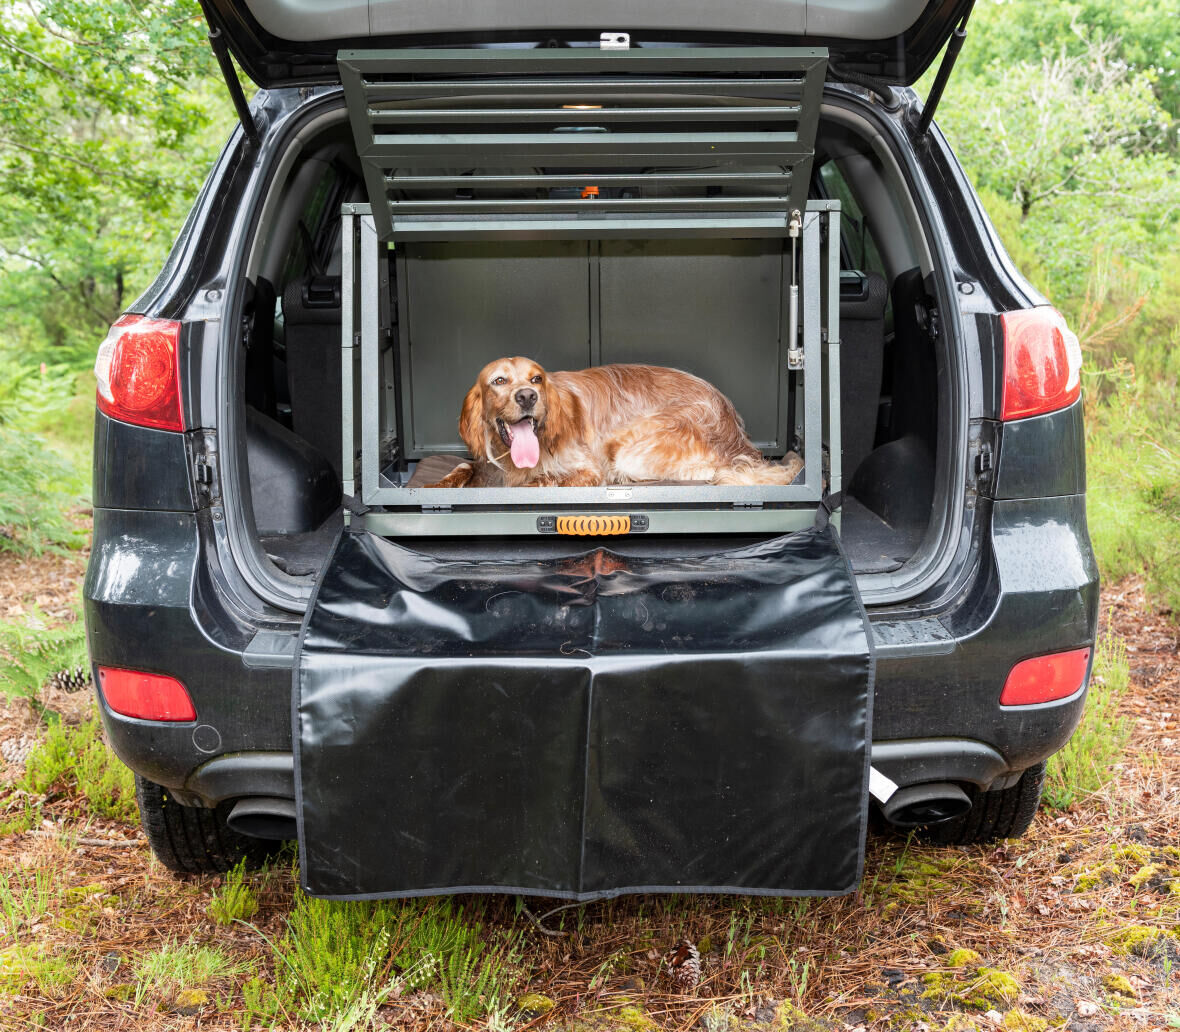 Safely transporting your hunting dog